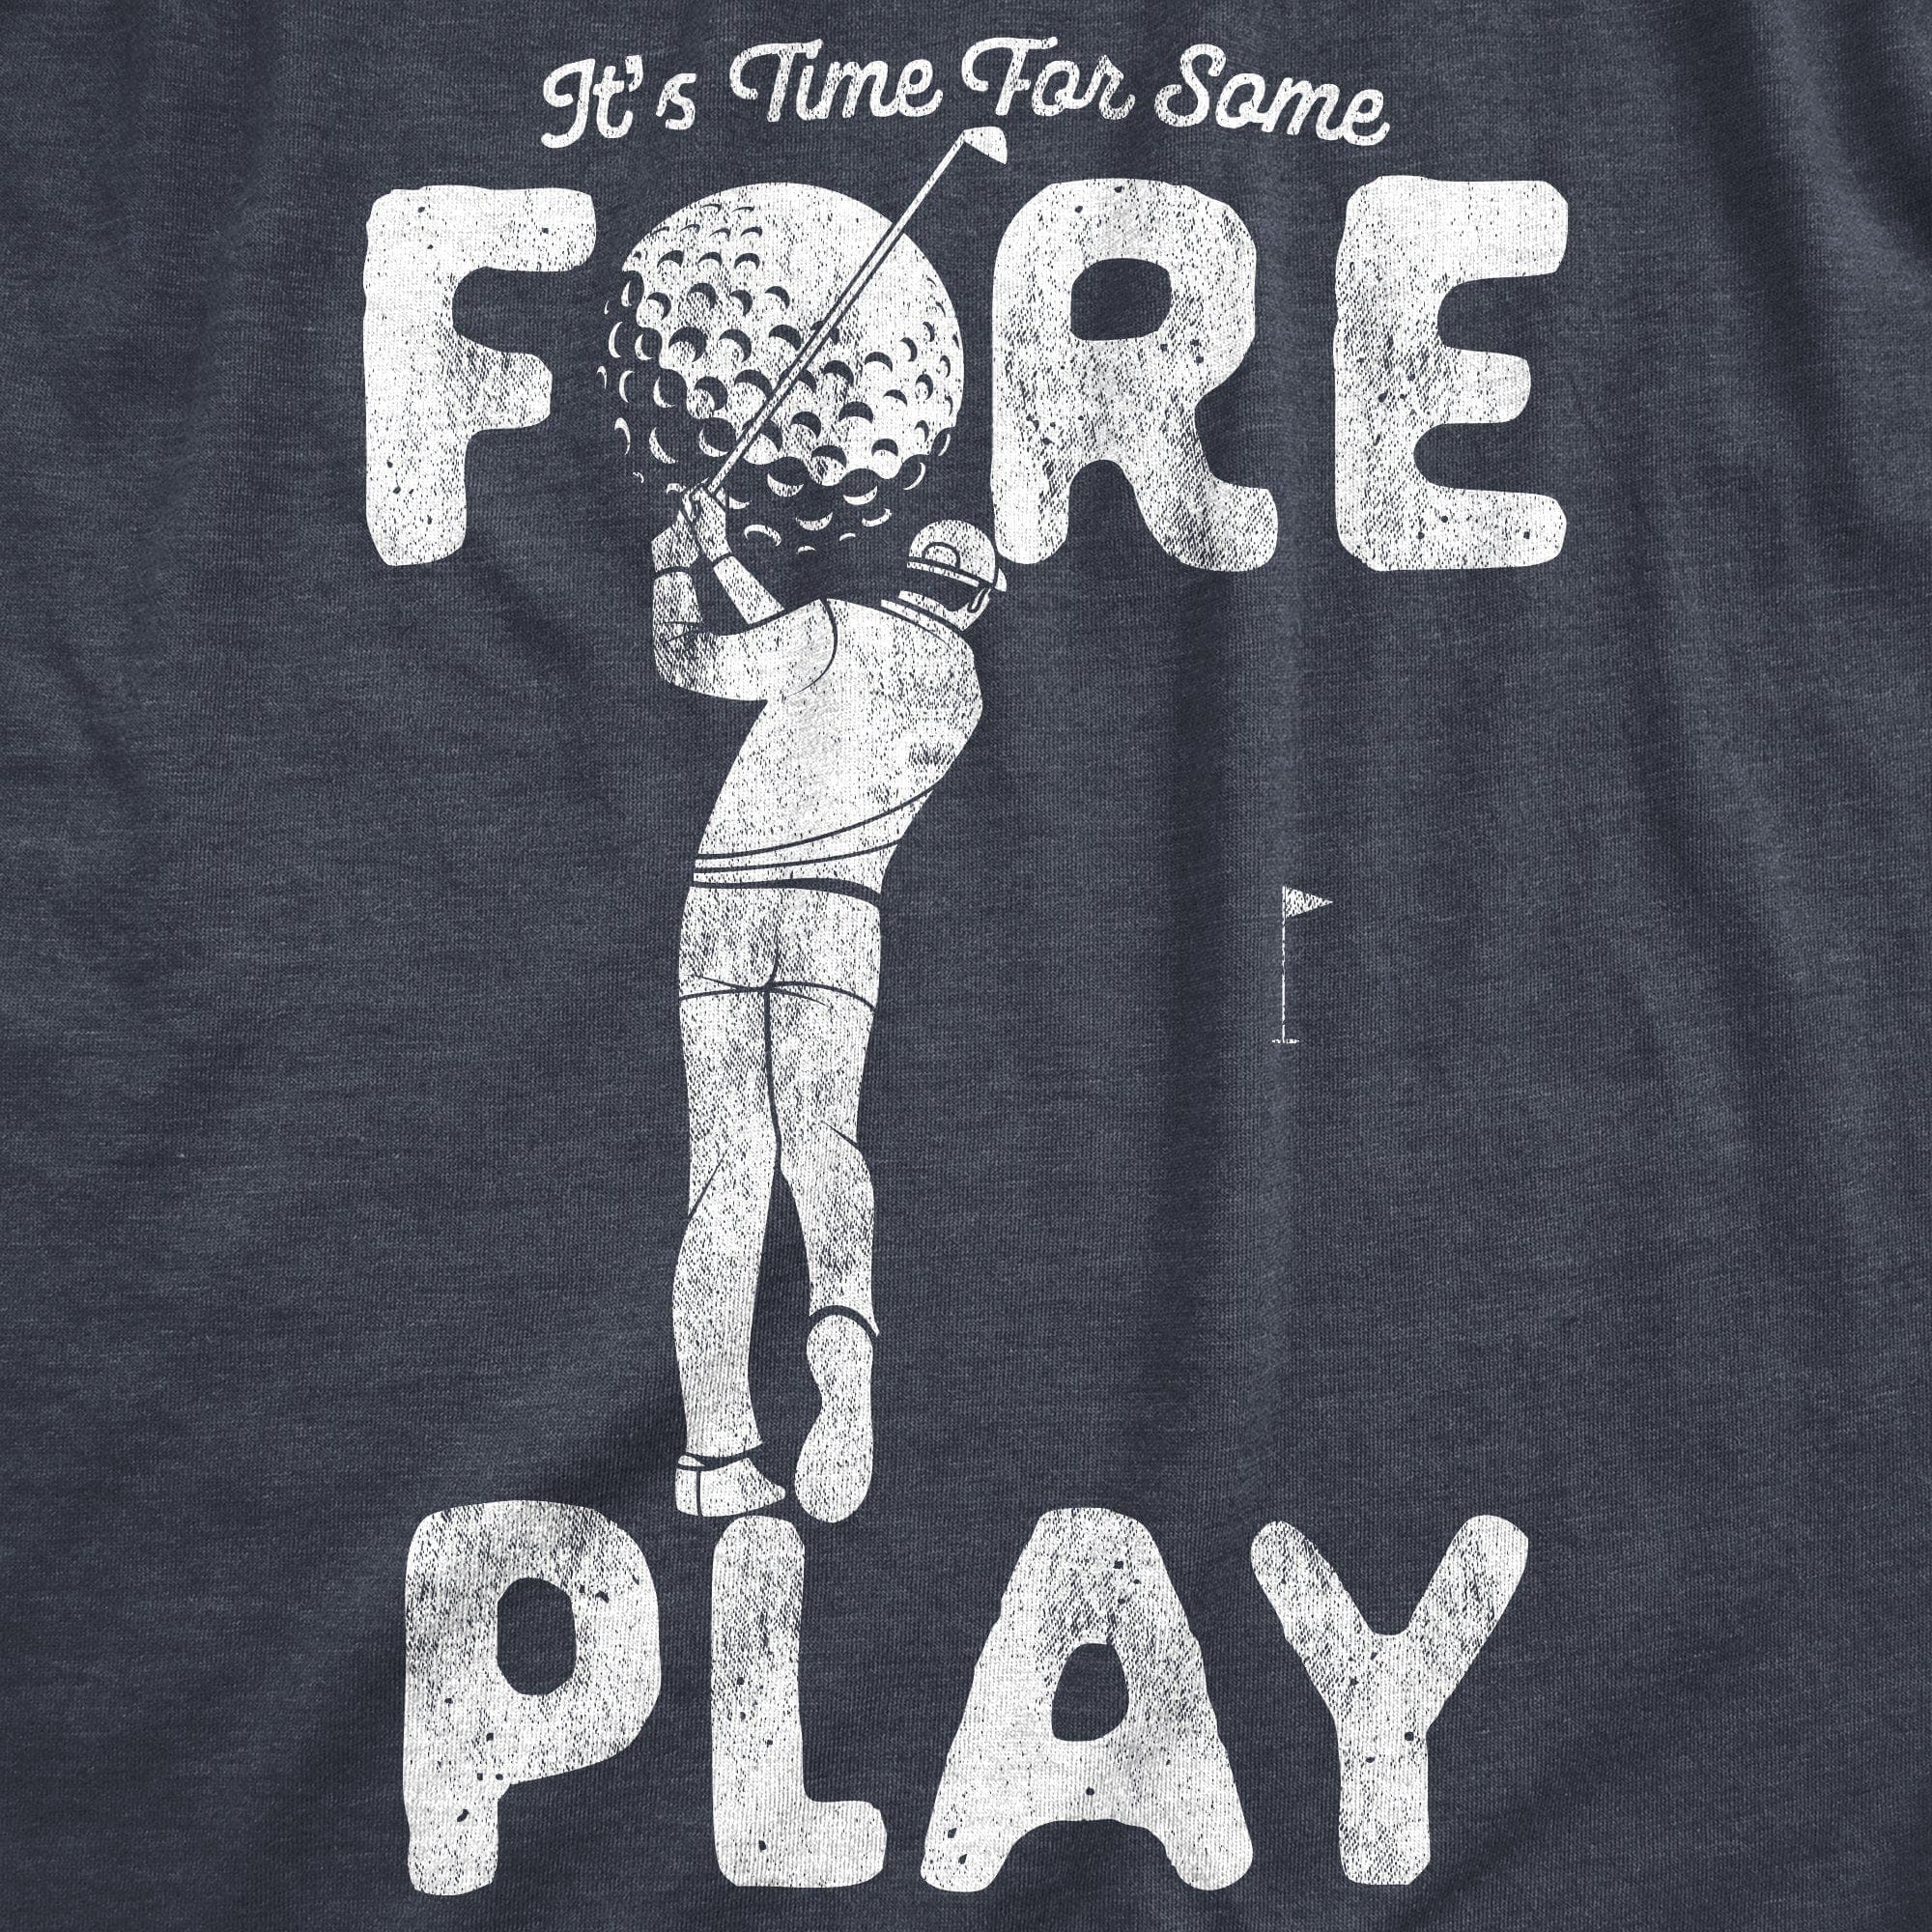 Time For Some Foreplay Men's Tshirt - Crazy Dog T-Shirts